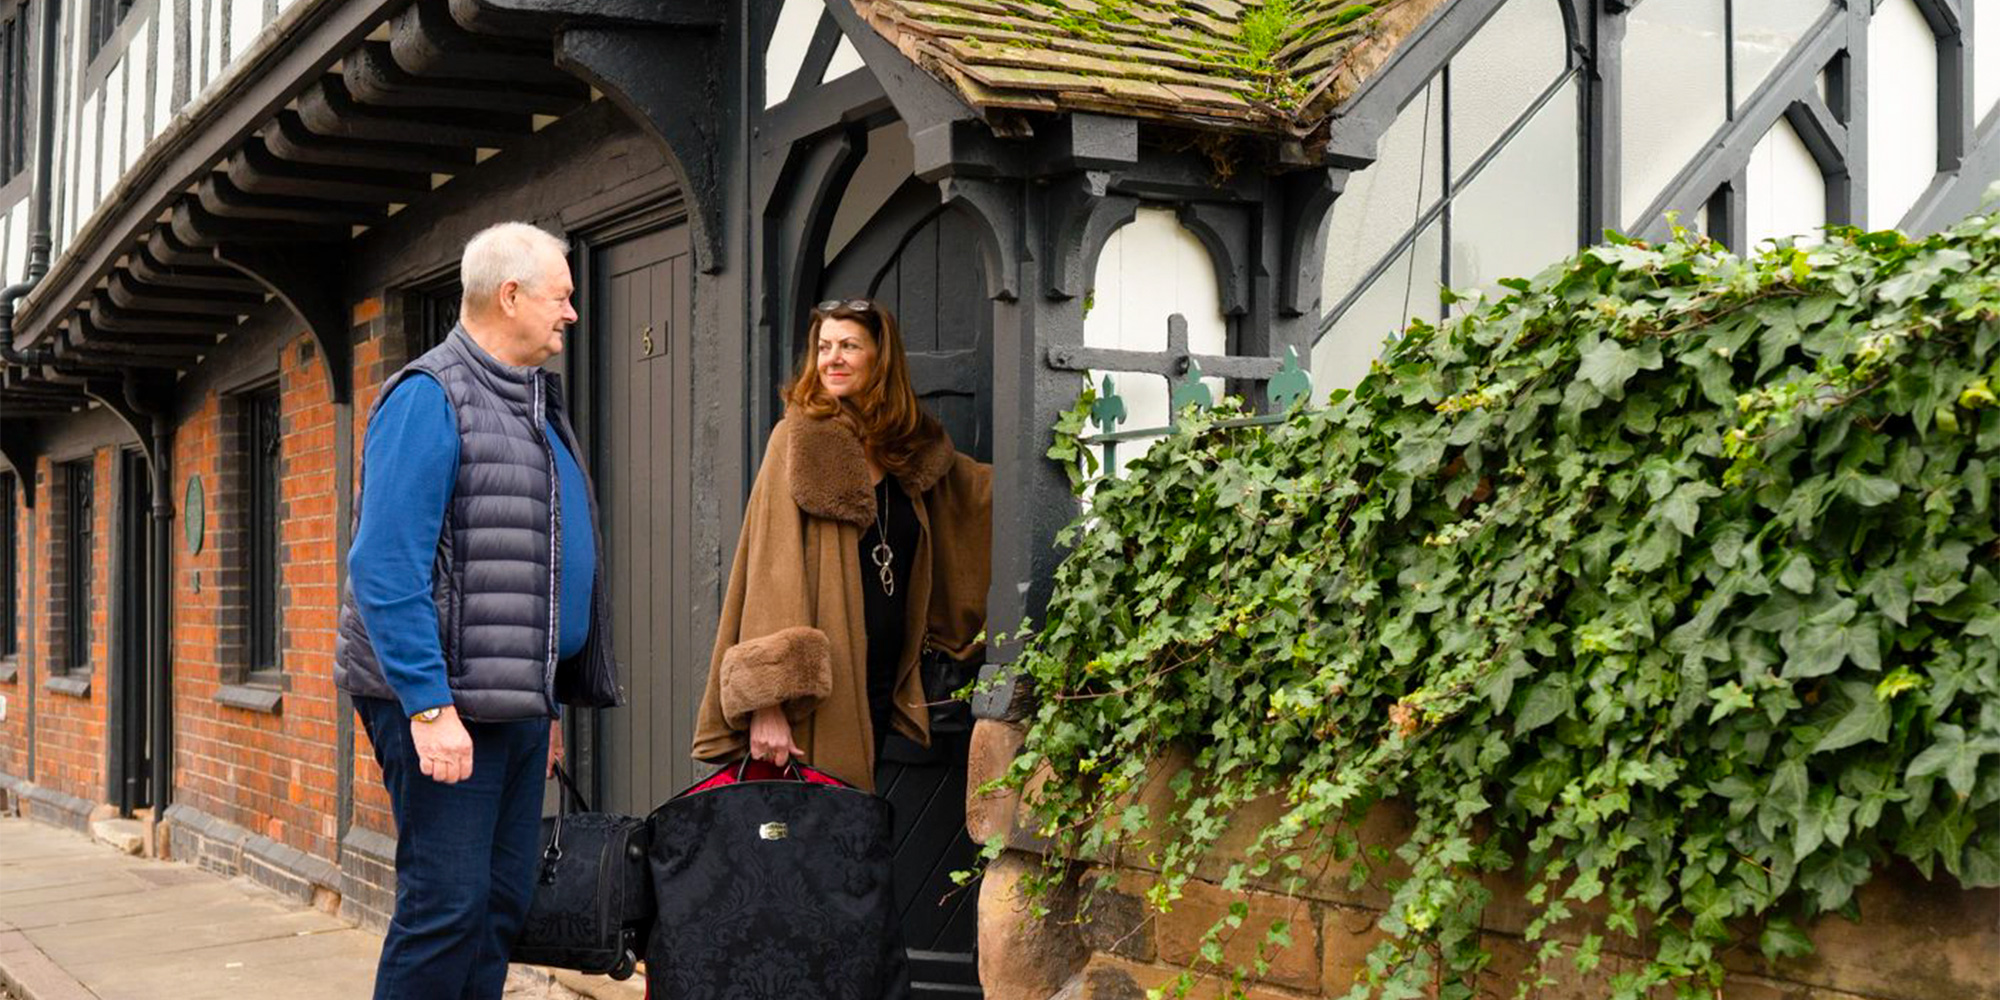 A couple with suitcases steps through the door of a half-timbered terraced house with a brick ground floor.